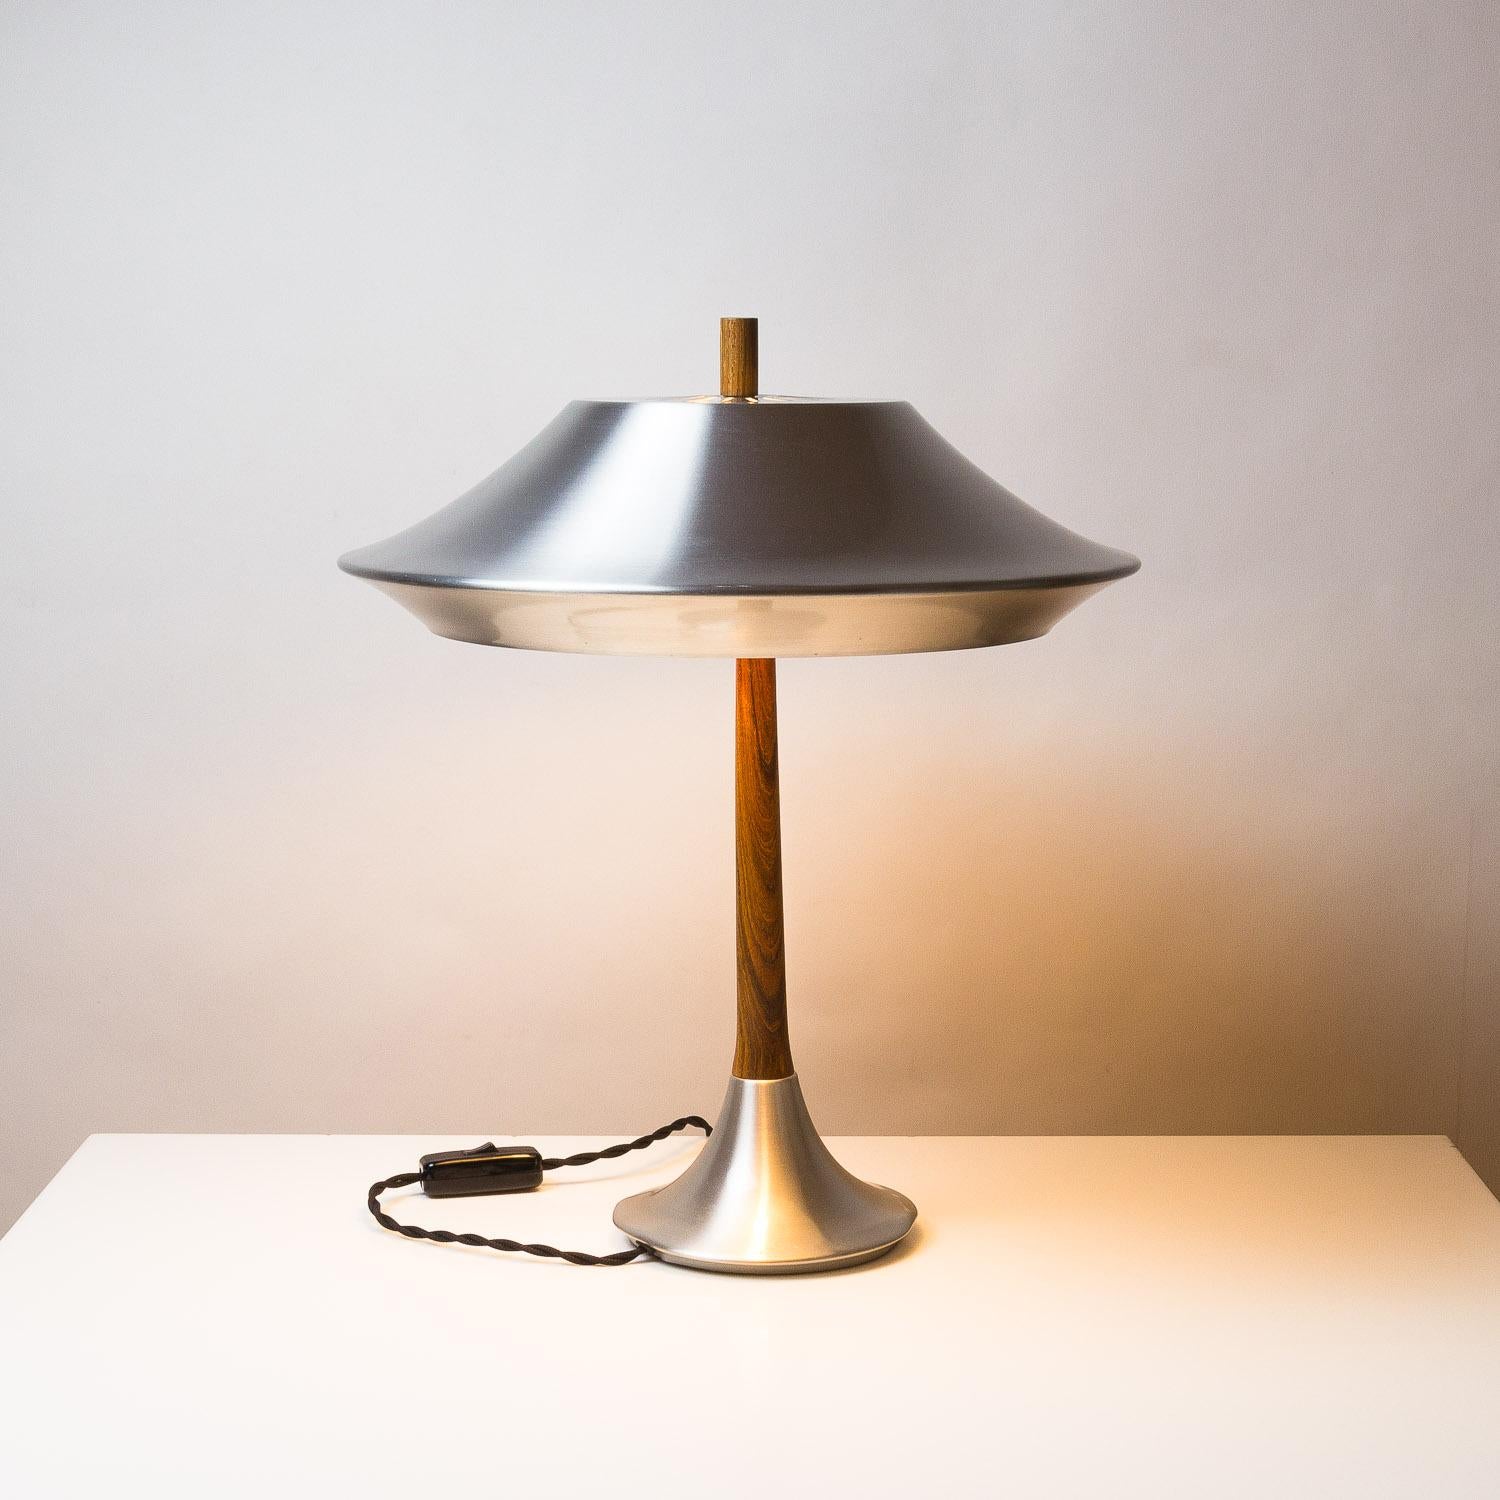 A rare Ambassador table light in aluminium and rosewood by Jo Hammerborg for Fog & Mørup, Denmark, 1960s.
Contact us for competitively priced worldwide shipping quotes.